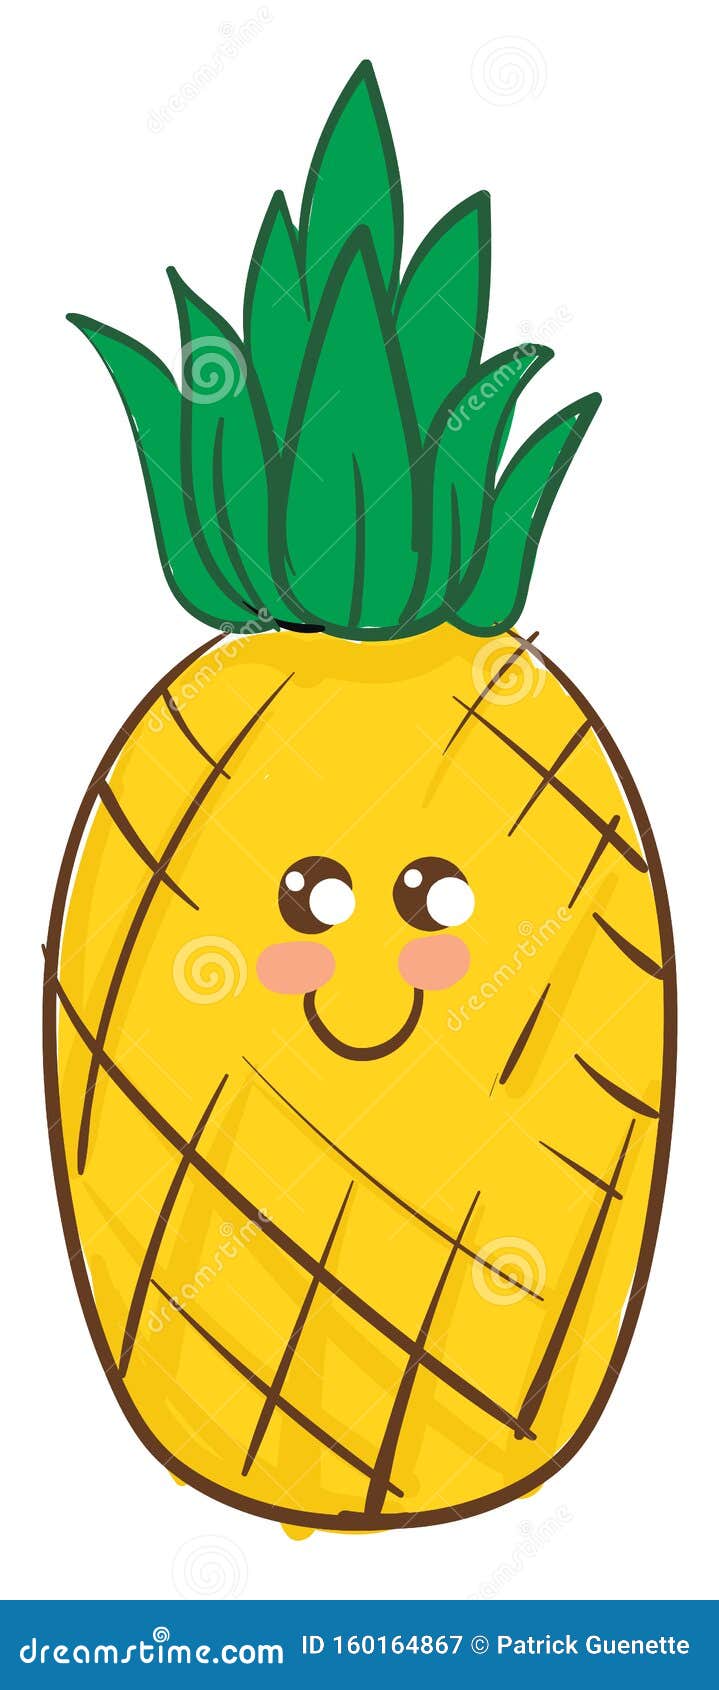 how to draw a pineapple easy | | Pineapple drawing, Cartoon pineapple,  Drawing for kids